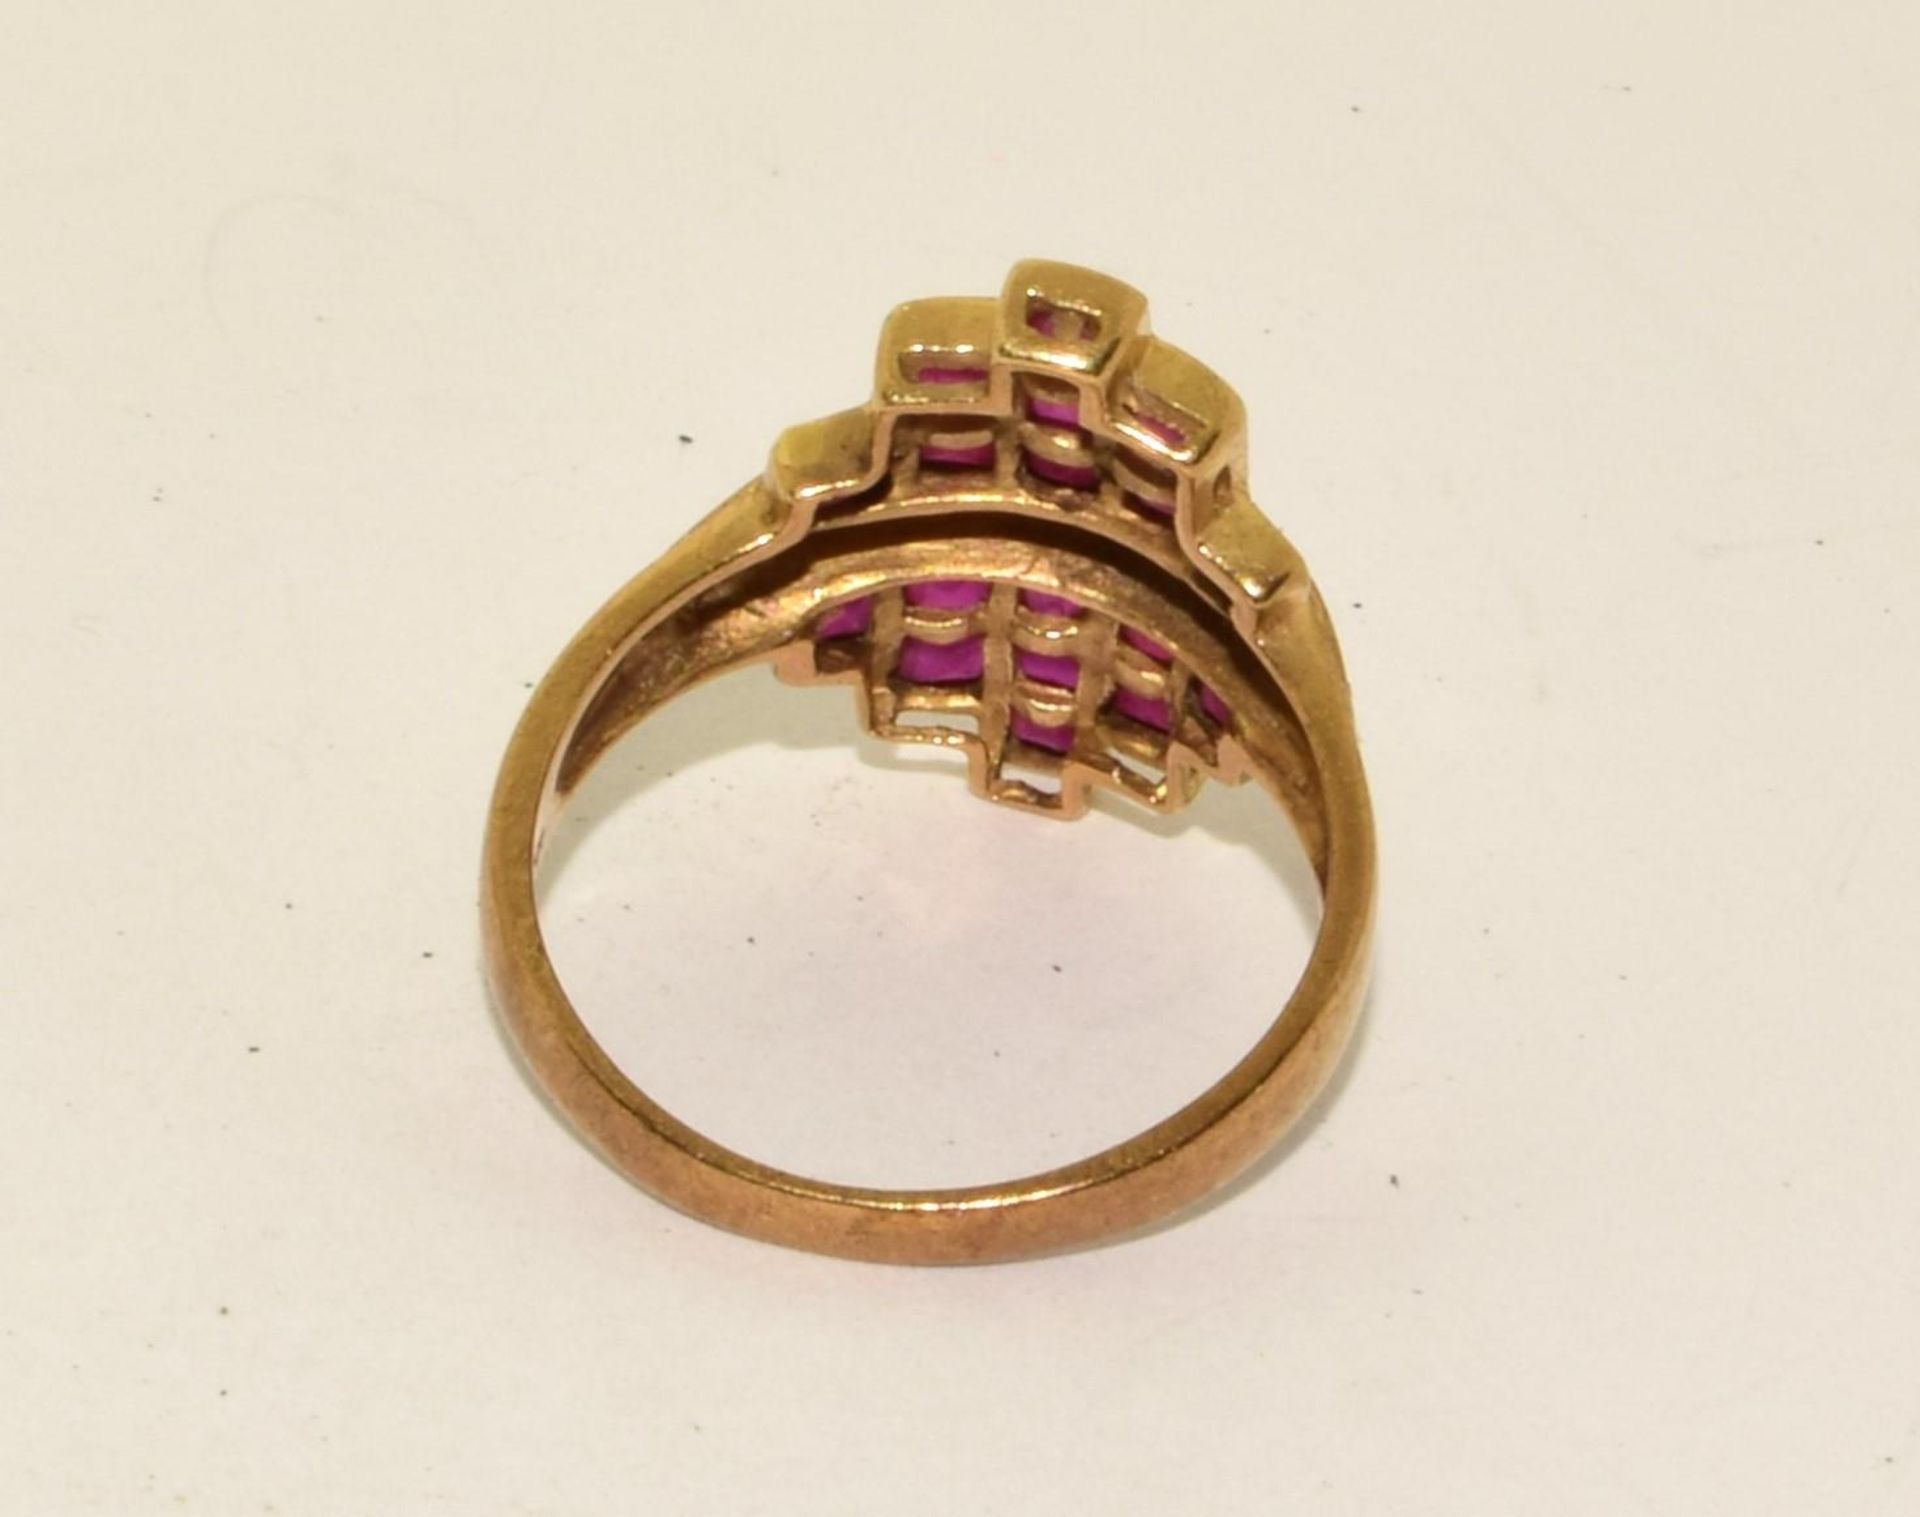 9ct gold art deco design Diamond and Ruby ring size N ref 65 - Image 3 of 5